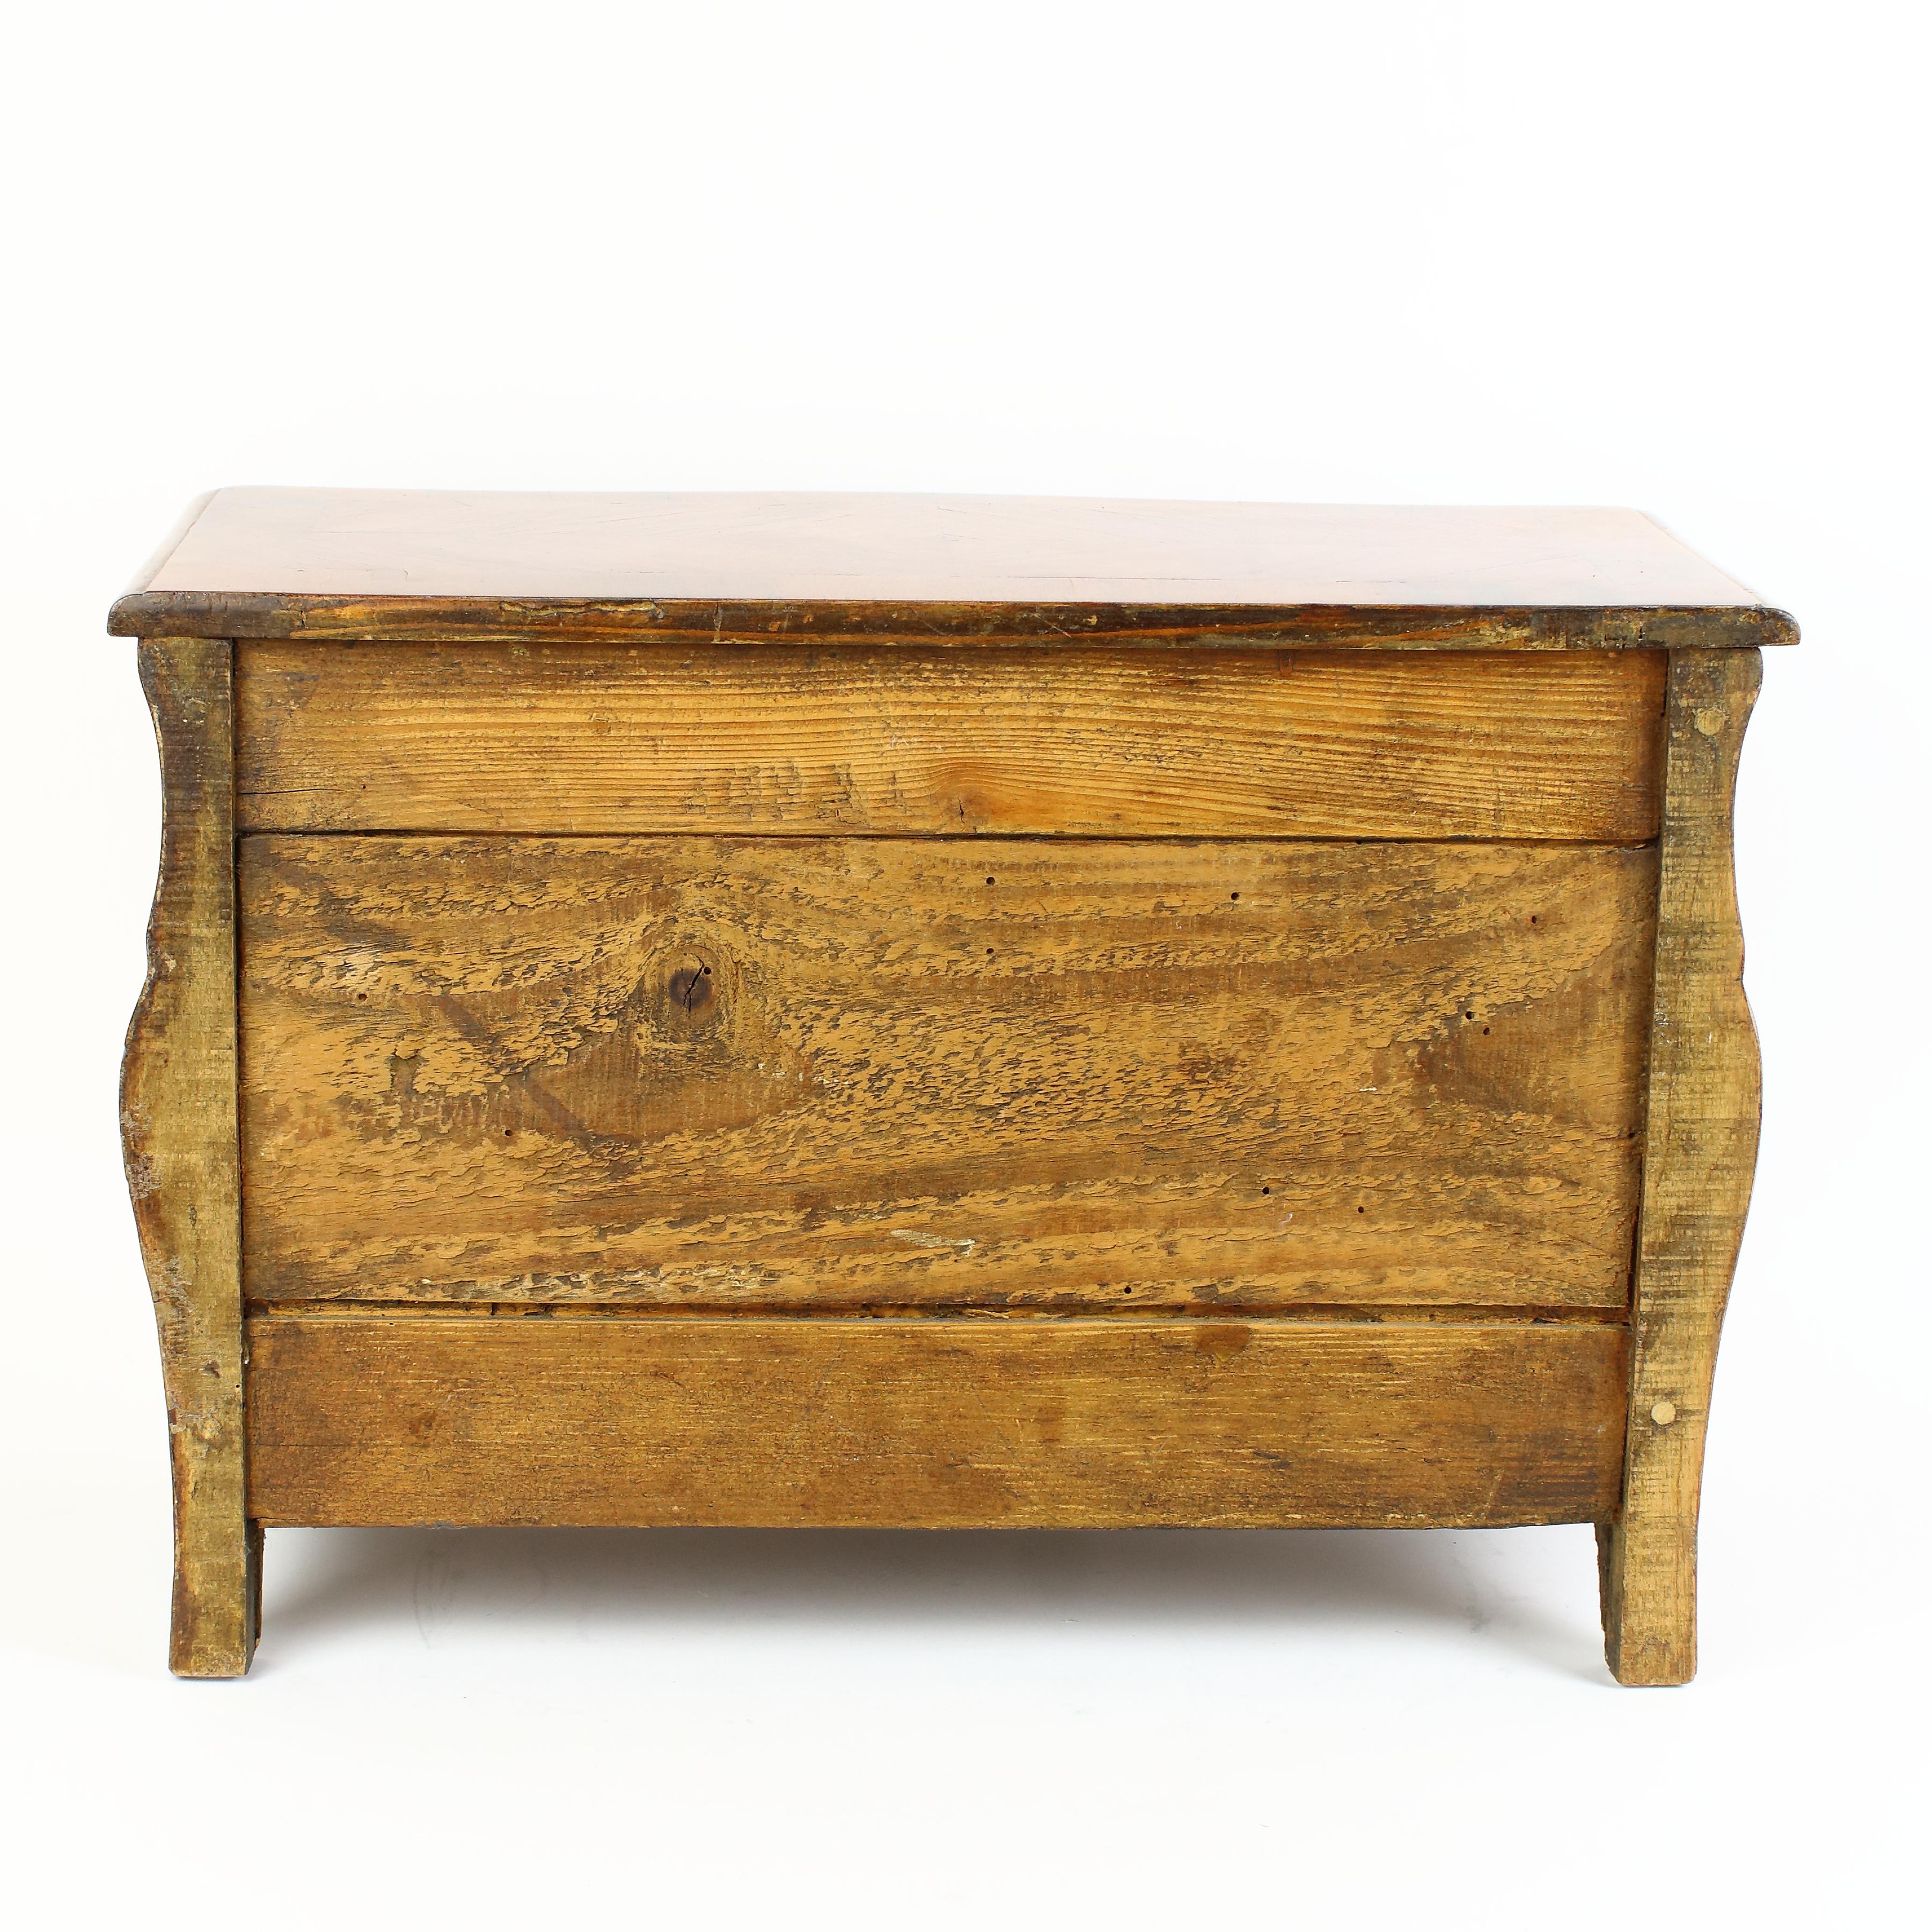 20th Century Louis XV Style Miniature Chest of Drawers or Commode À La Parisienne